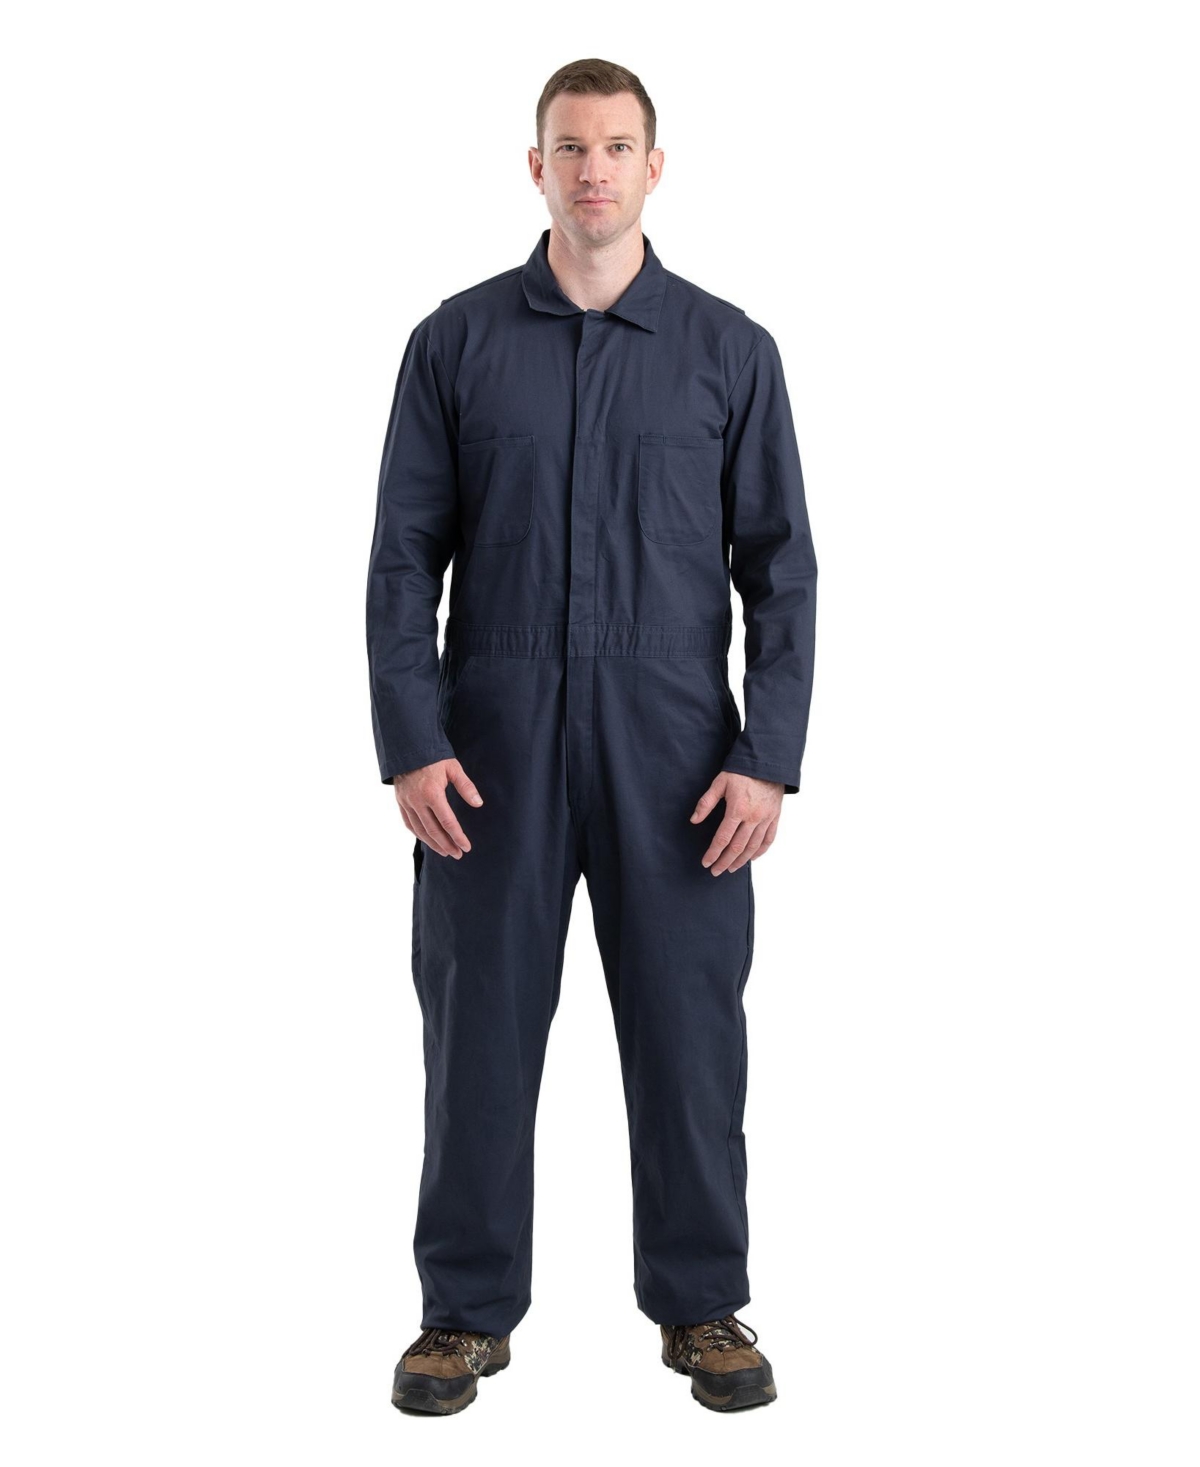 Men's Highland Flex Cotton Unlined Coverall - Navy